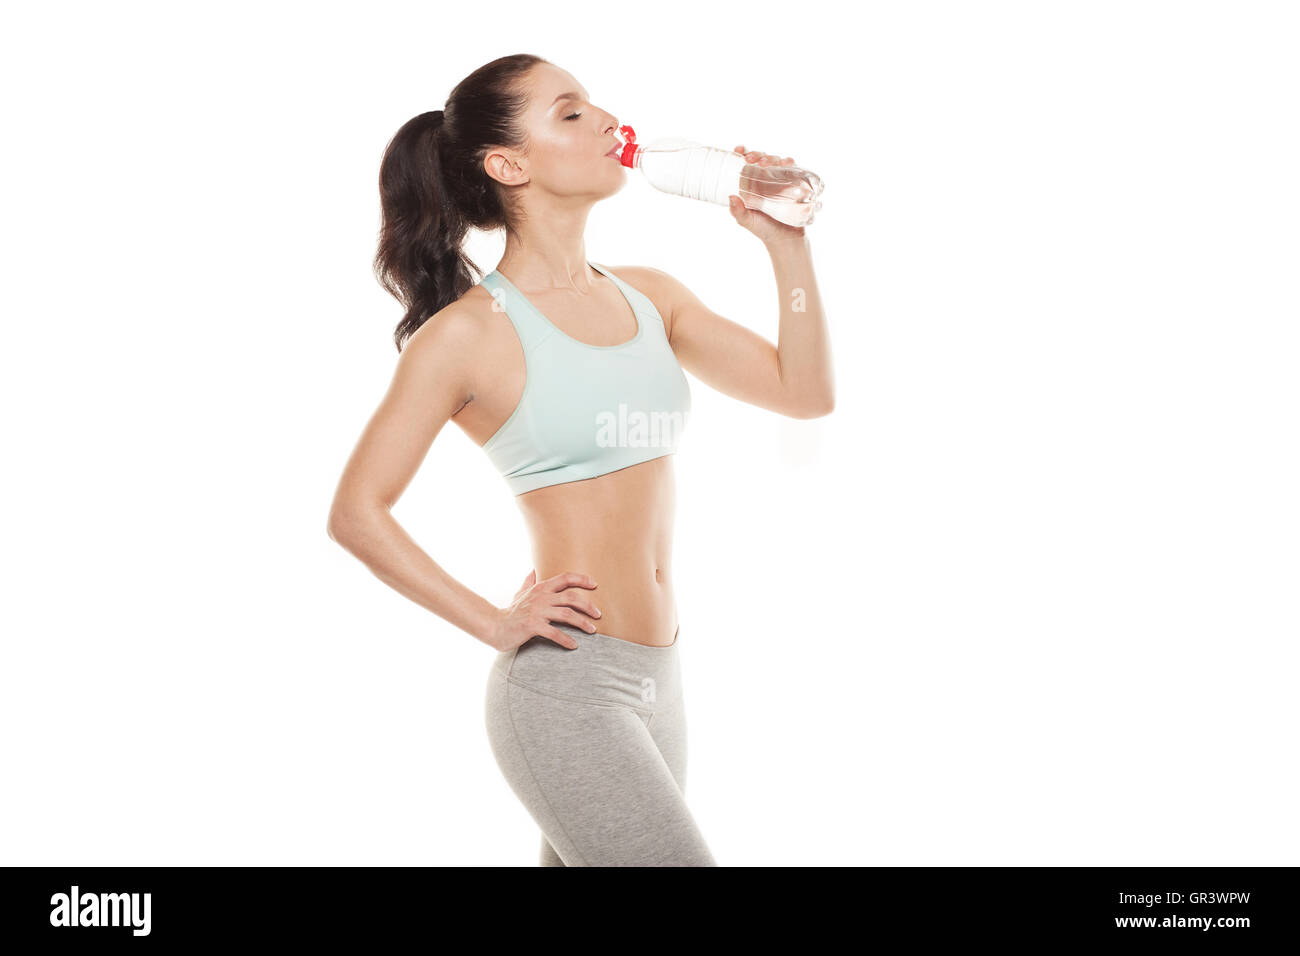 Sporty girl drinking water from a bottle after a workout, fitness training, isolated on white background Stock Photo